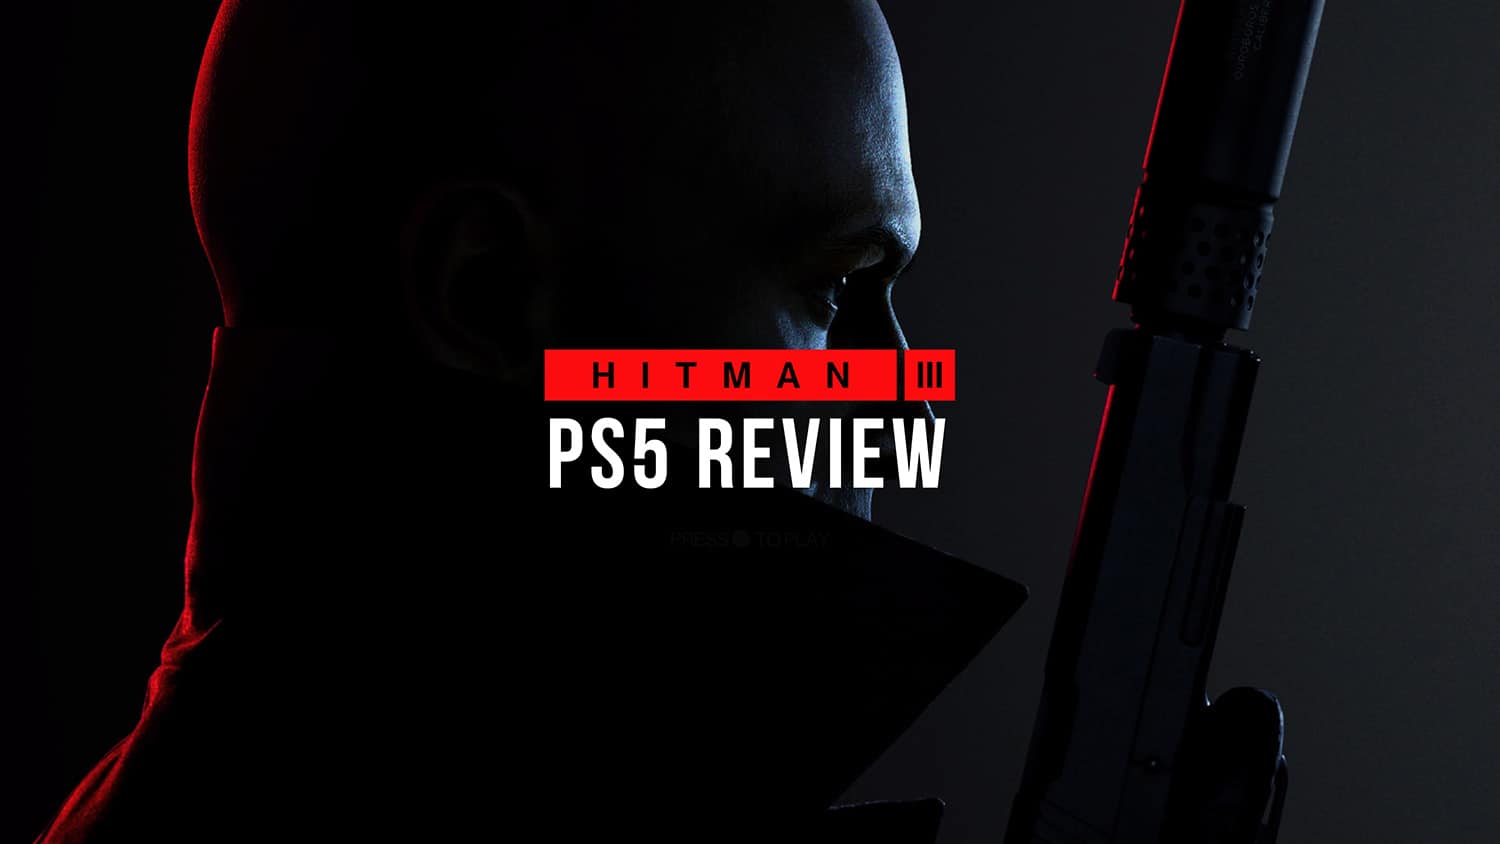 Hitman 3 PS5 Review: A masterful escalation